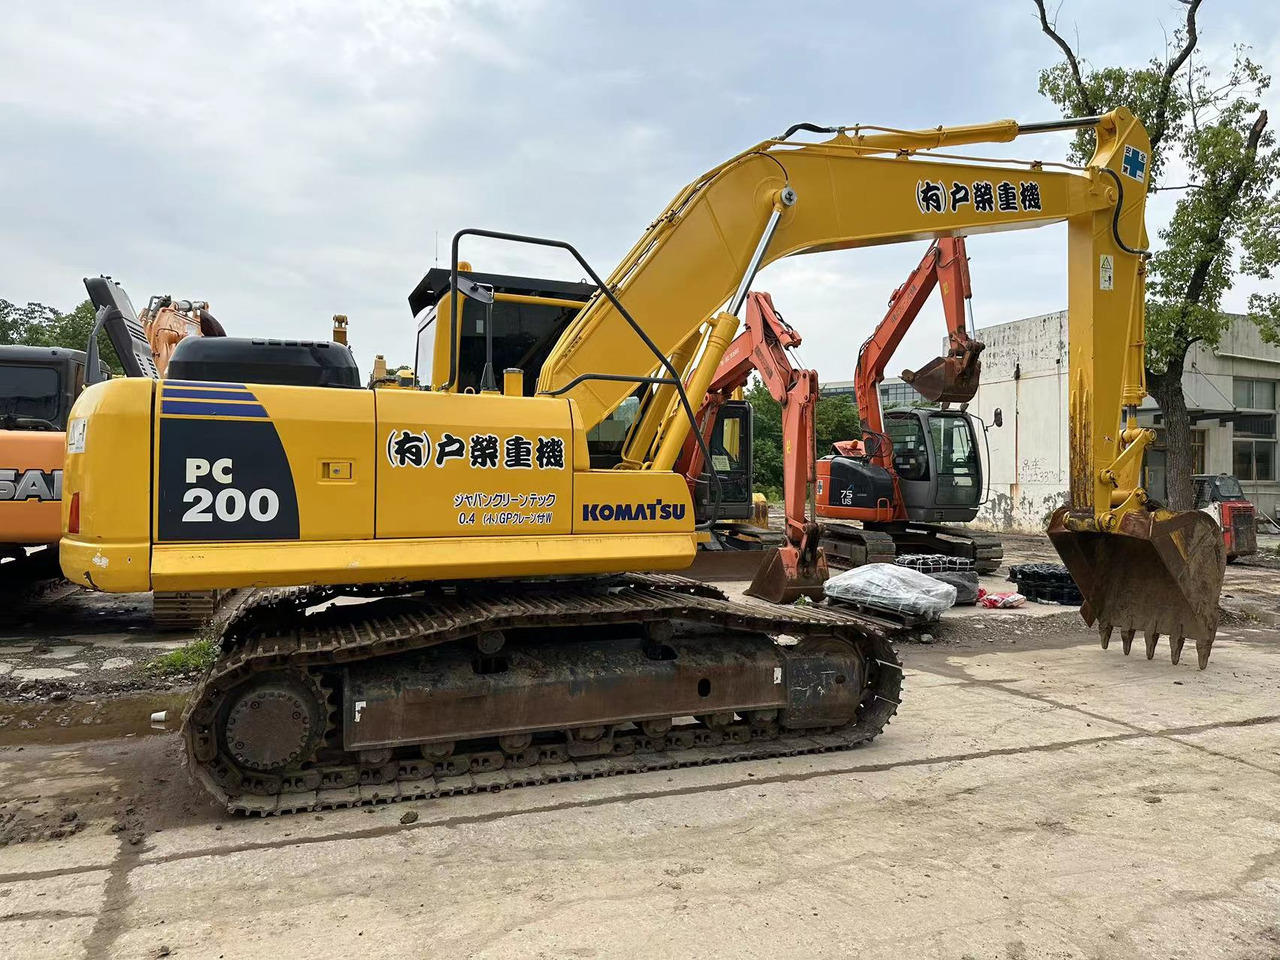 Kettenbagger High quality Good Performance KOMATSU PC200-8N1 with original design and strong power low working hours good condition on sale: das Bild 3